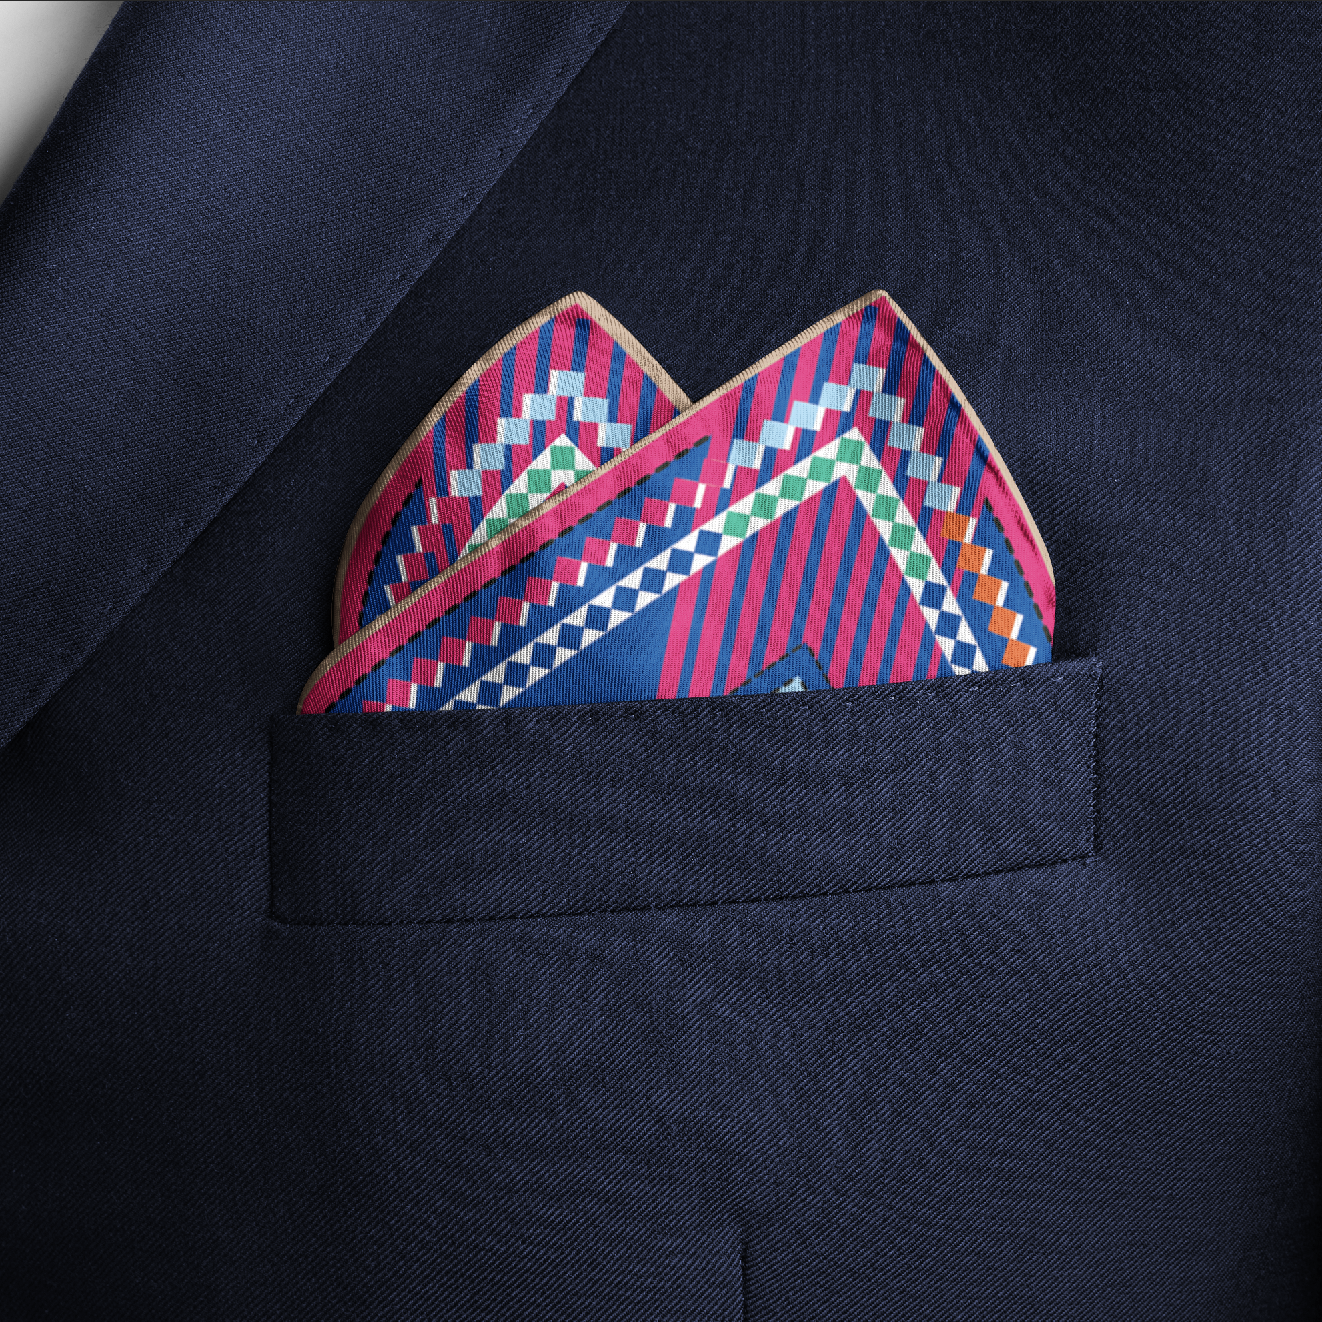 The Penny Pocket Square